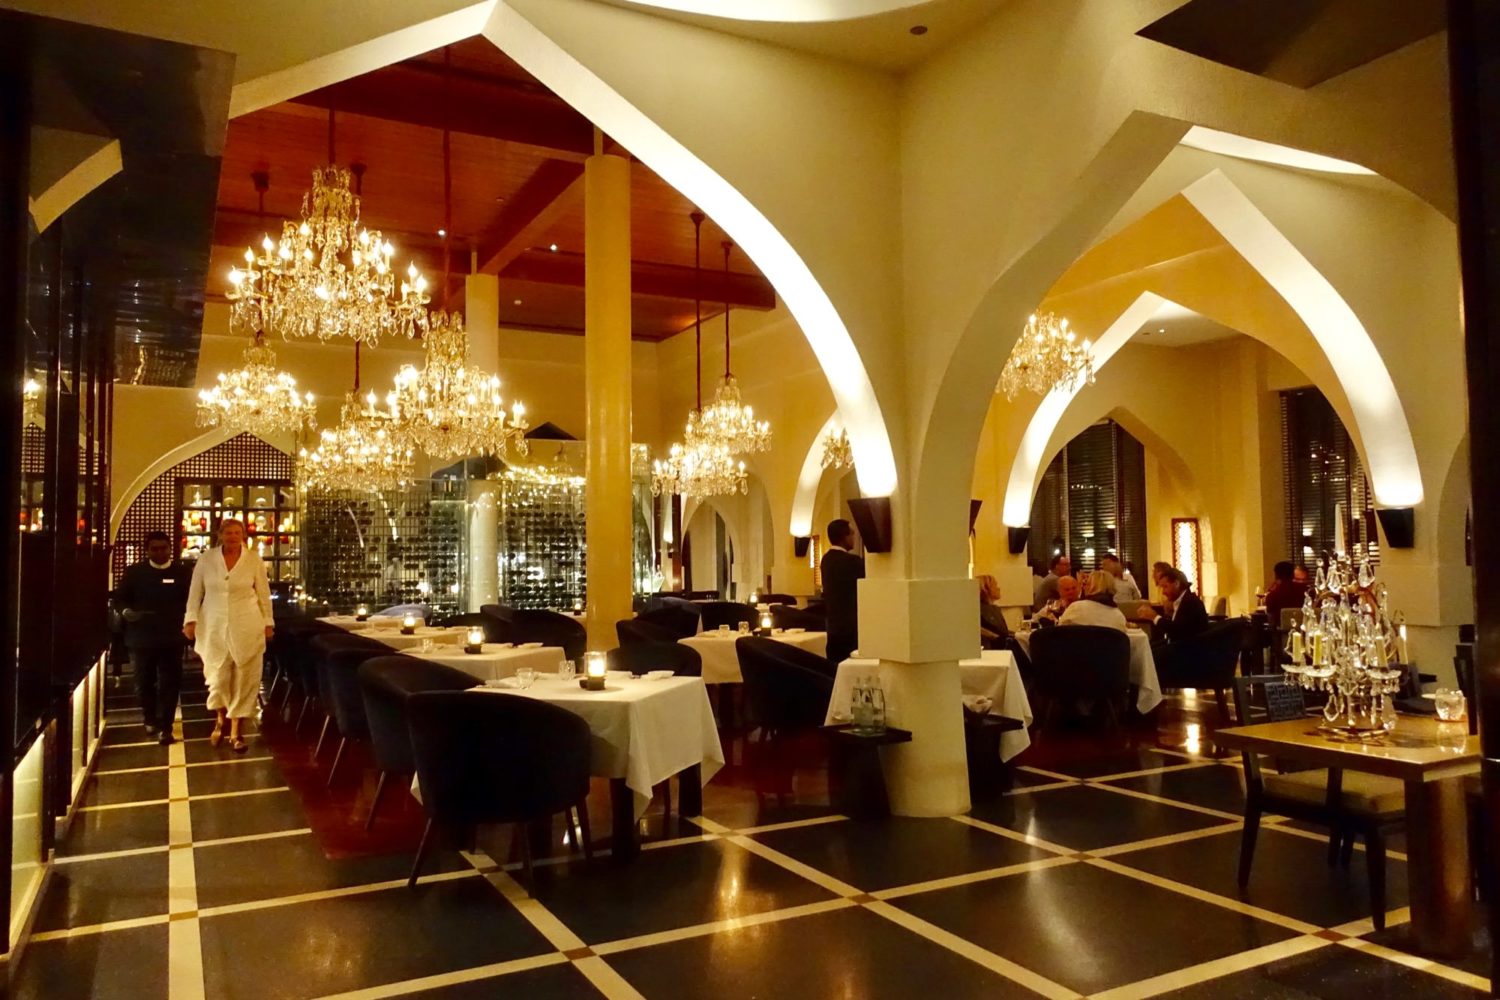 The Chedi Muscat dining room